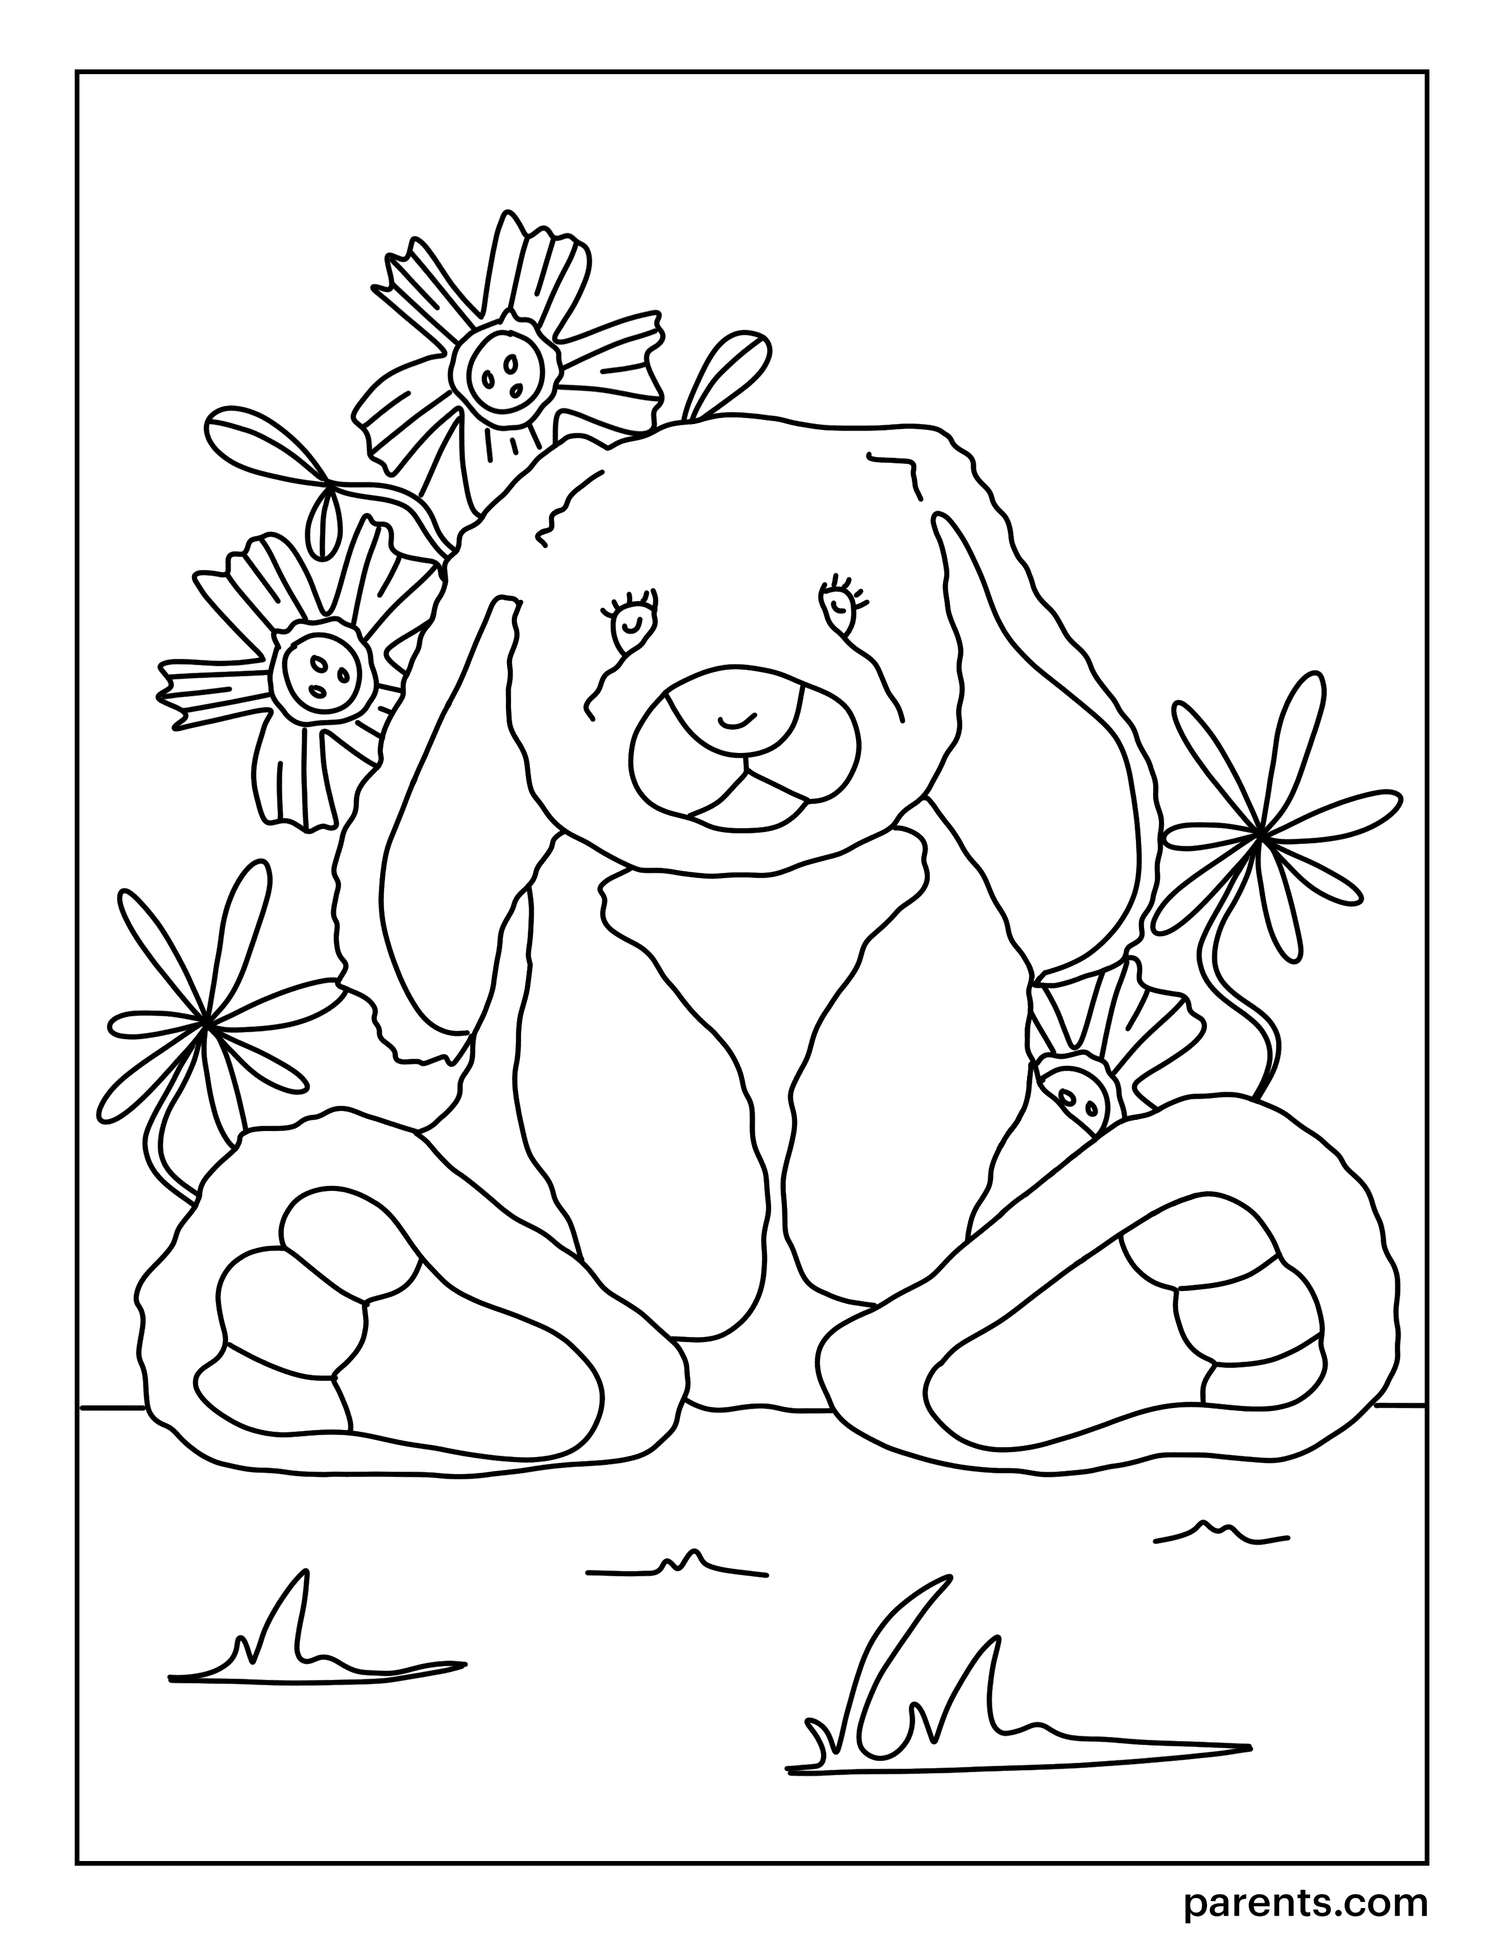 Furry Coloring Pages / All products from furry coloring pages category